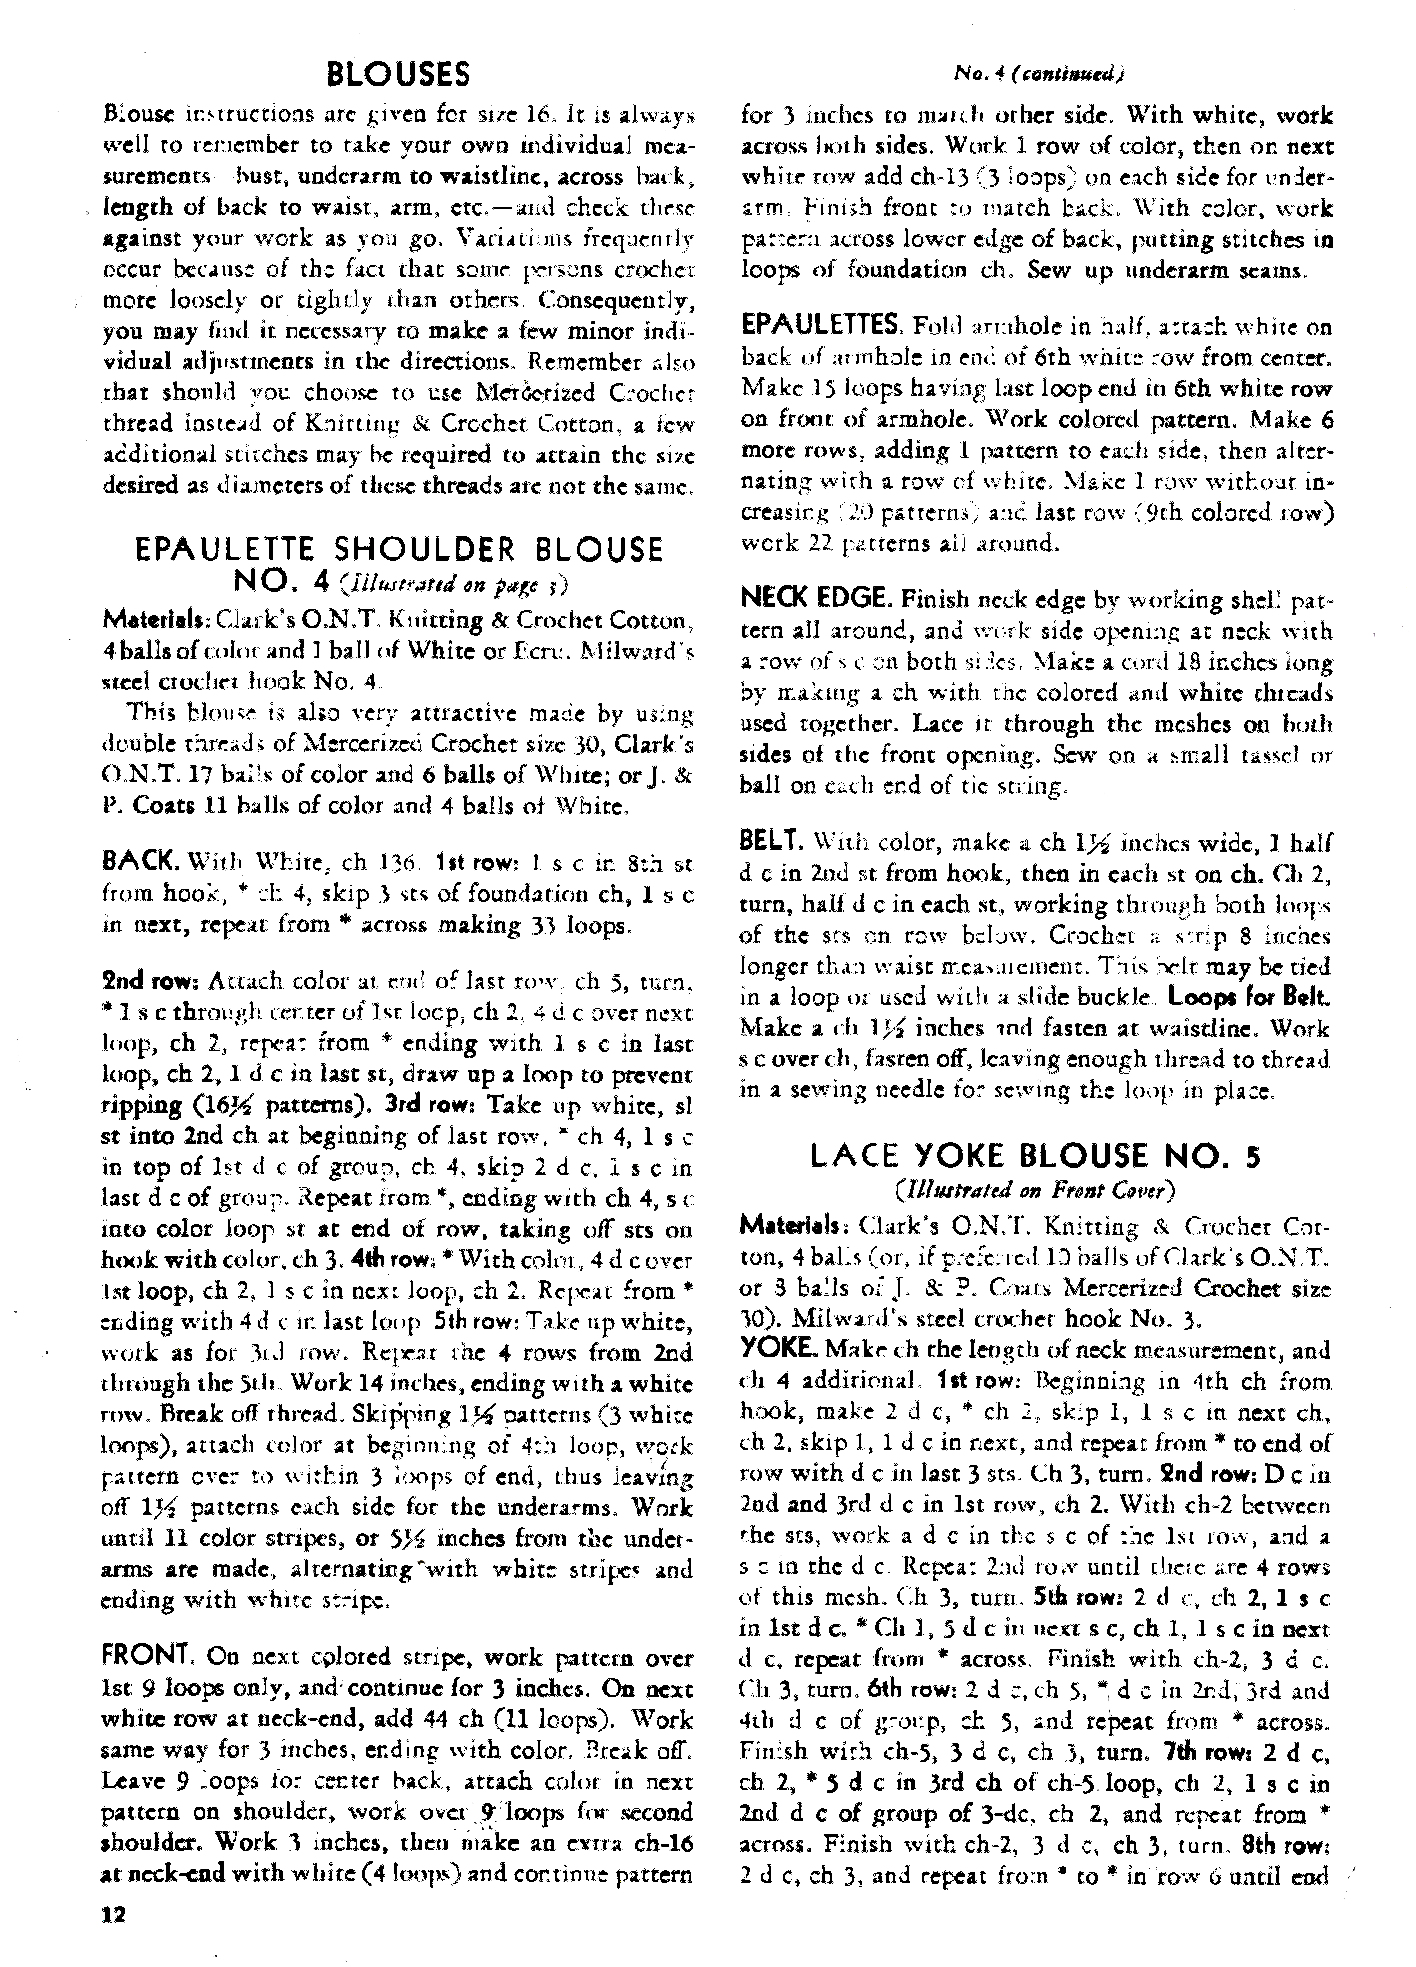 12 Instructions 1930's Boilfast Page 